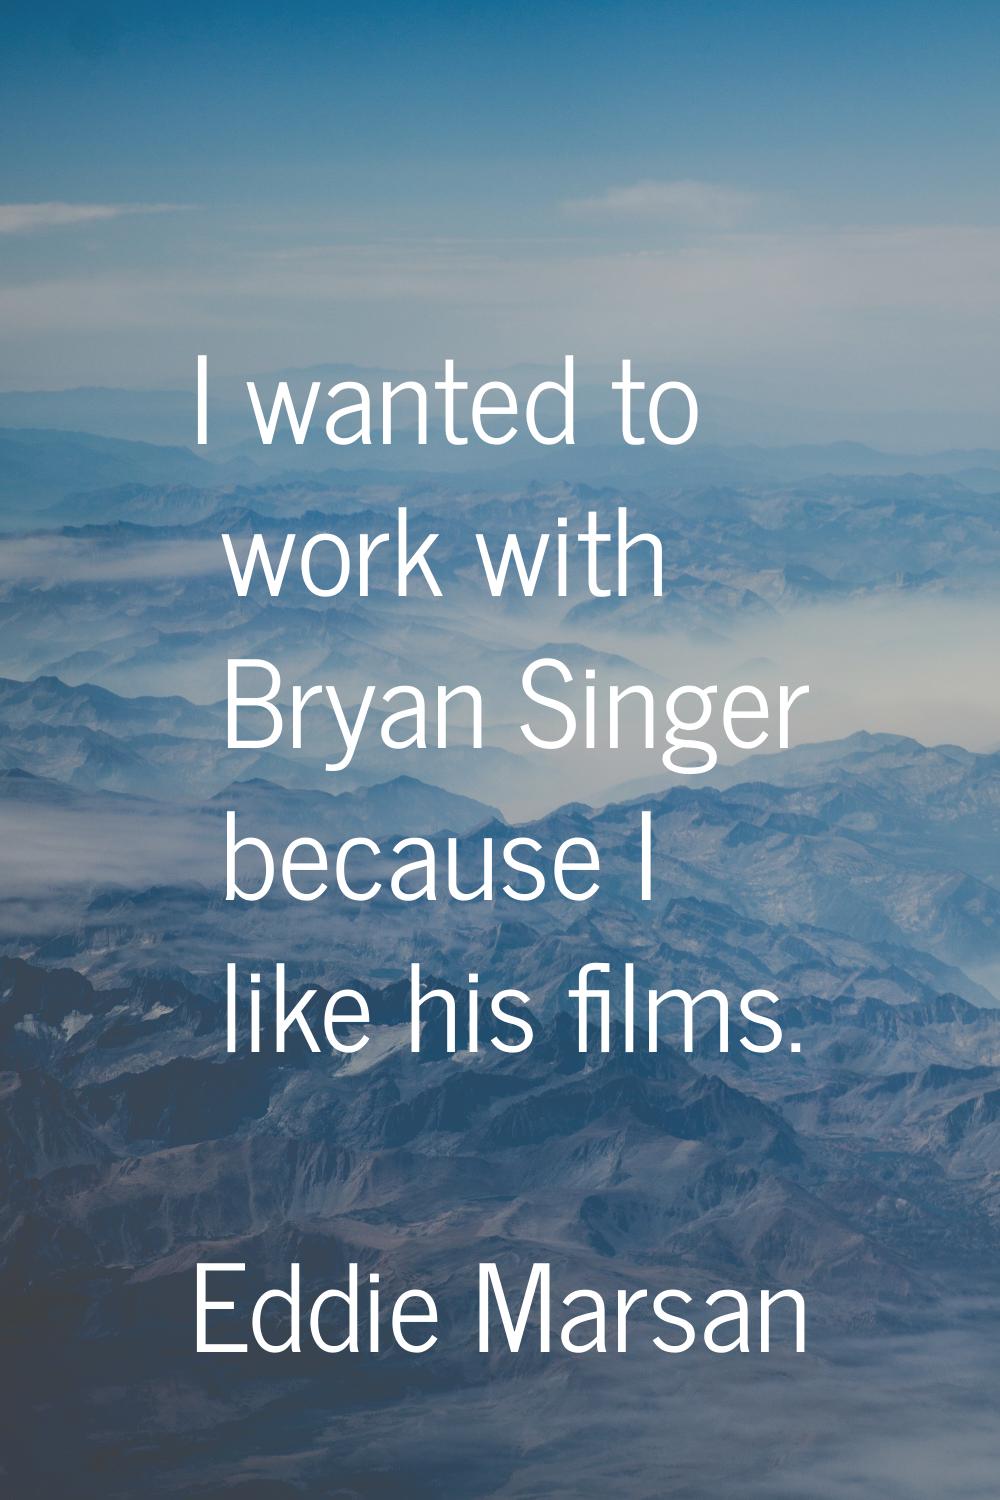 I wanted to work with Bryan Singer because I like his films.